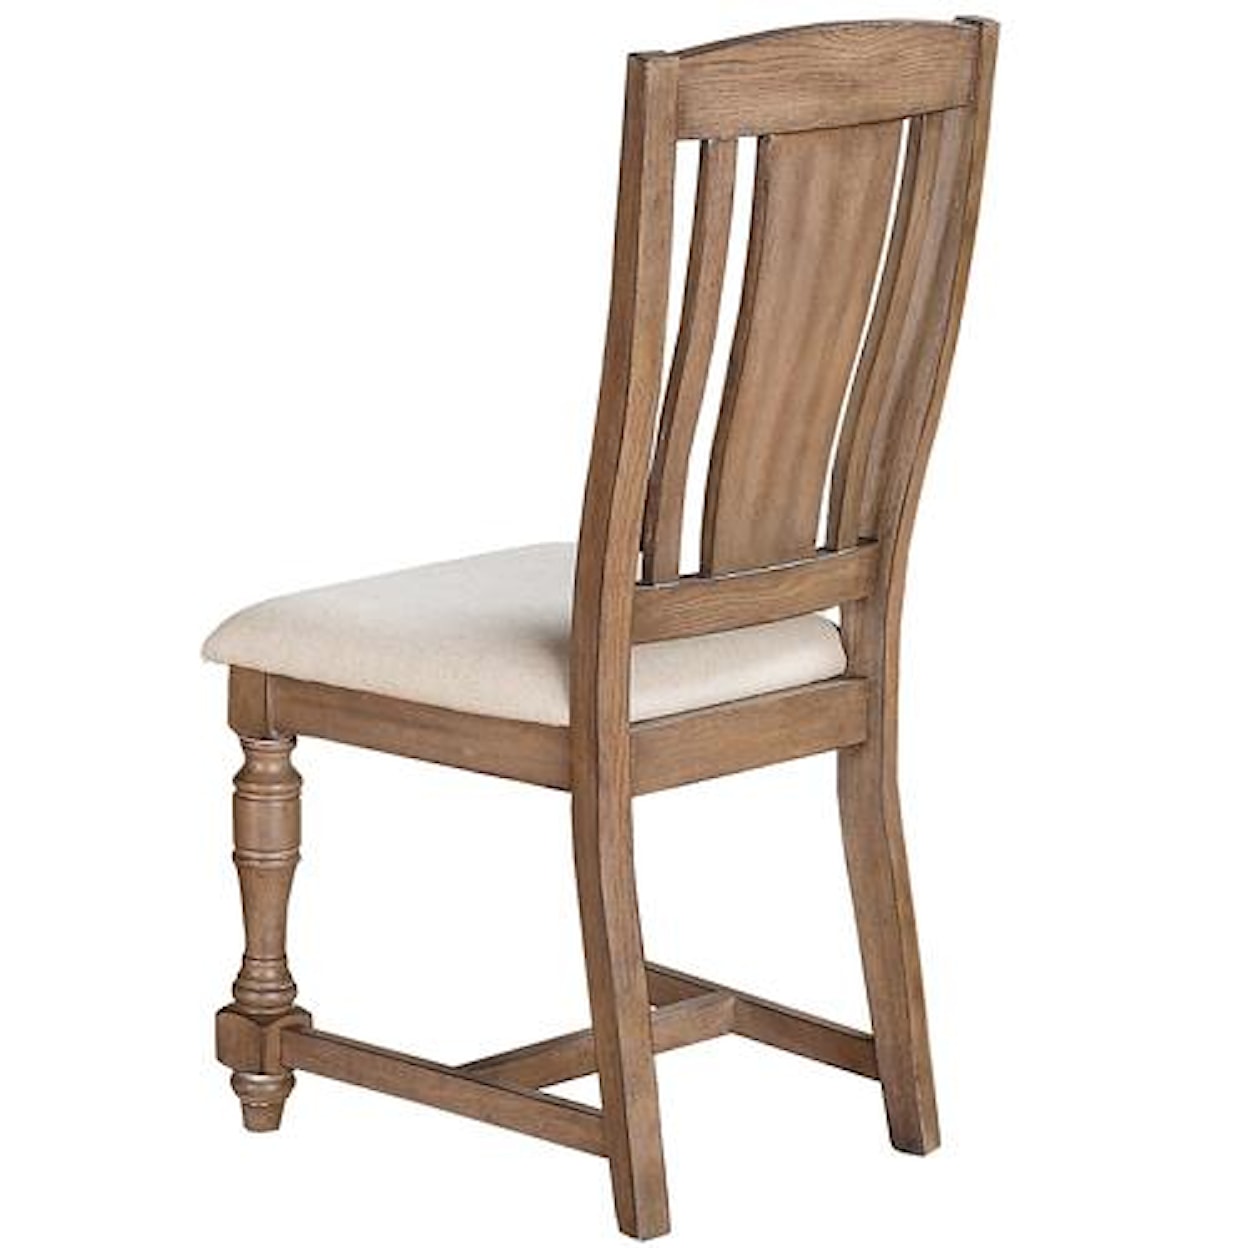 Winners Only Xcalibur Slat Back Side Chair